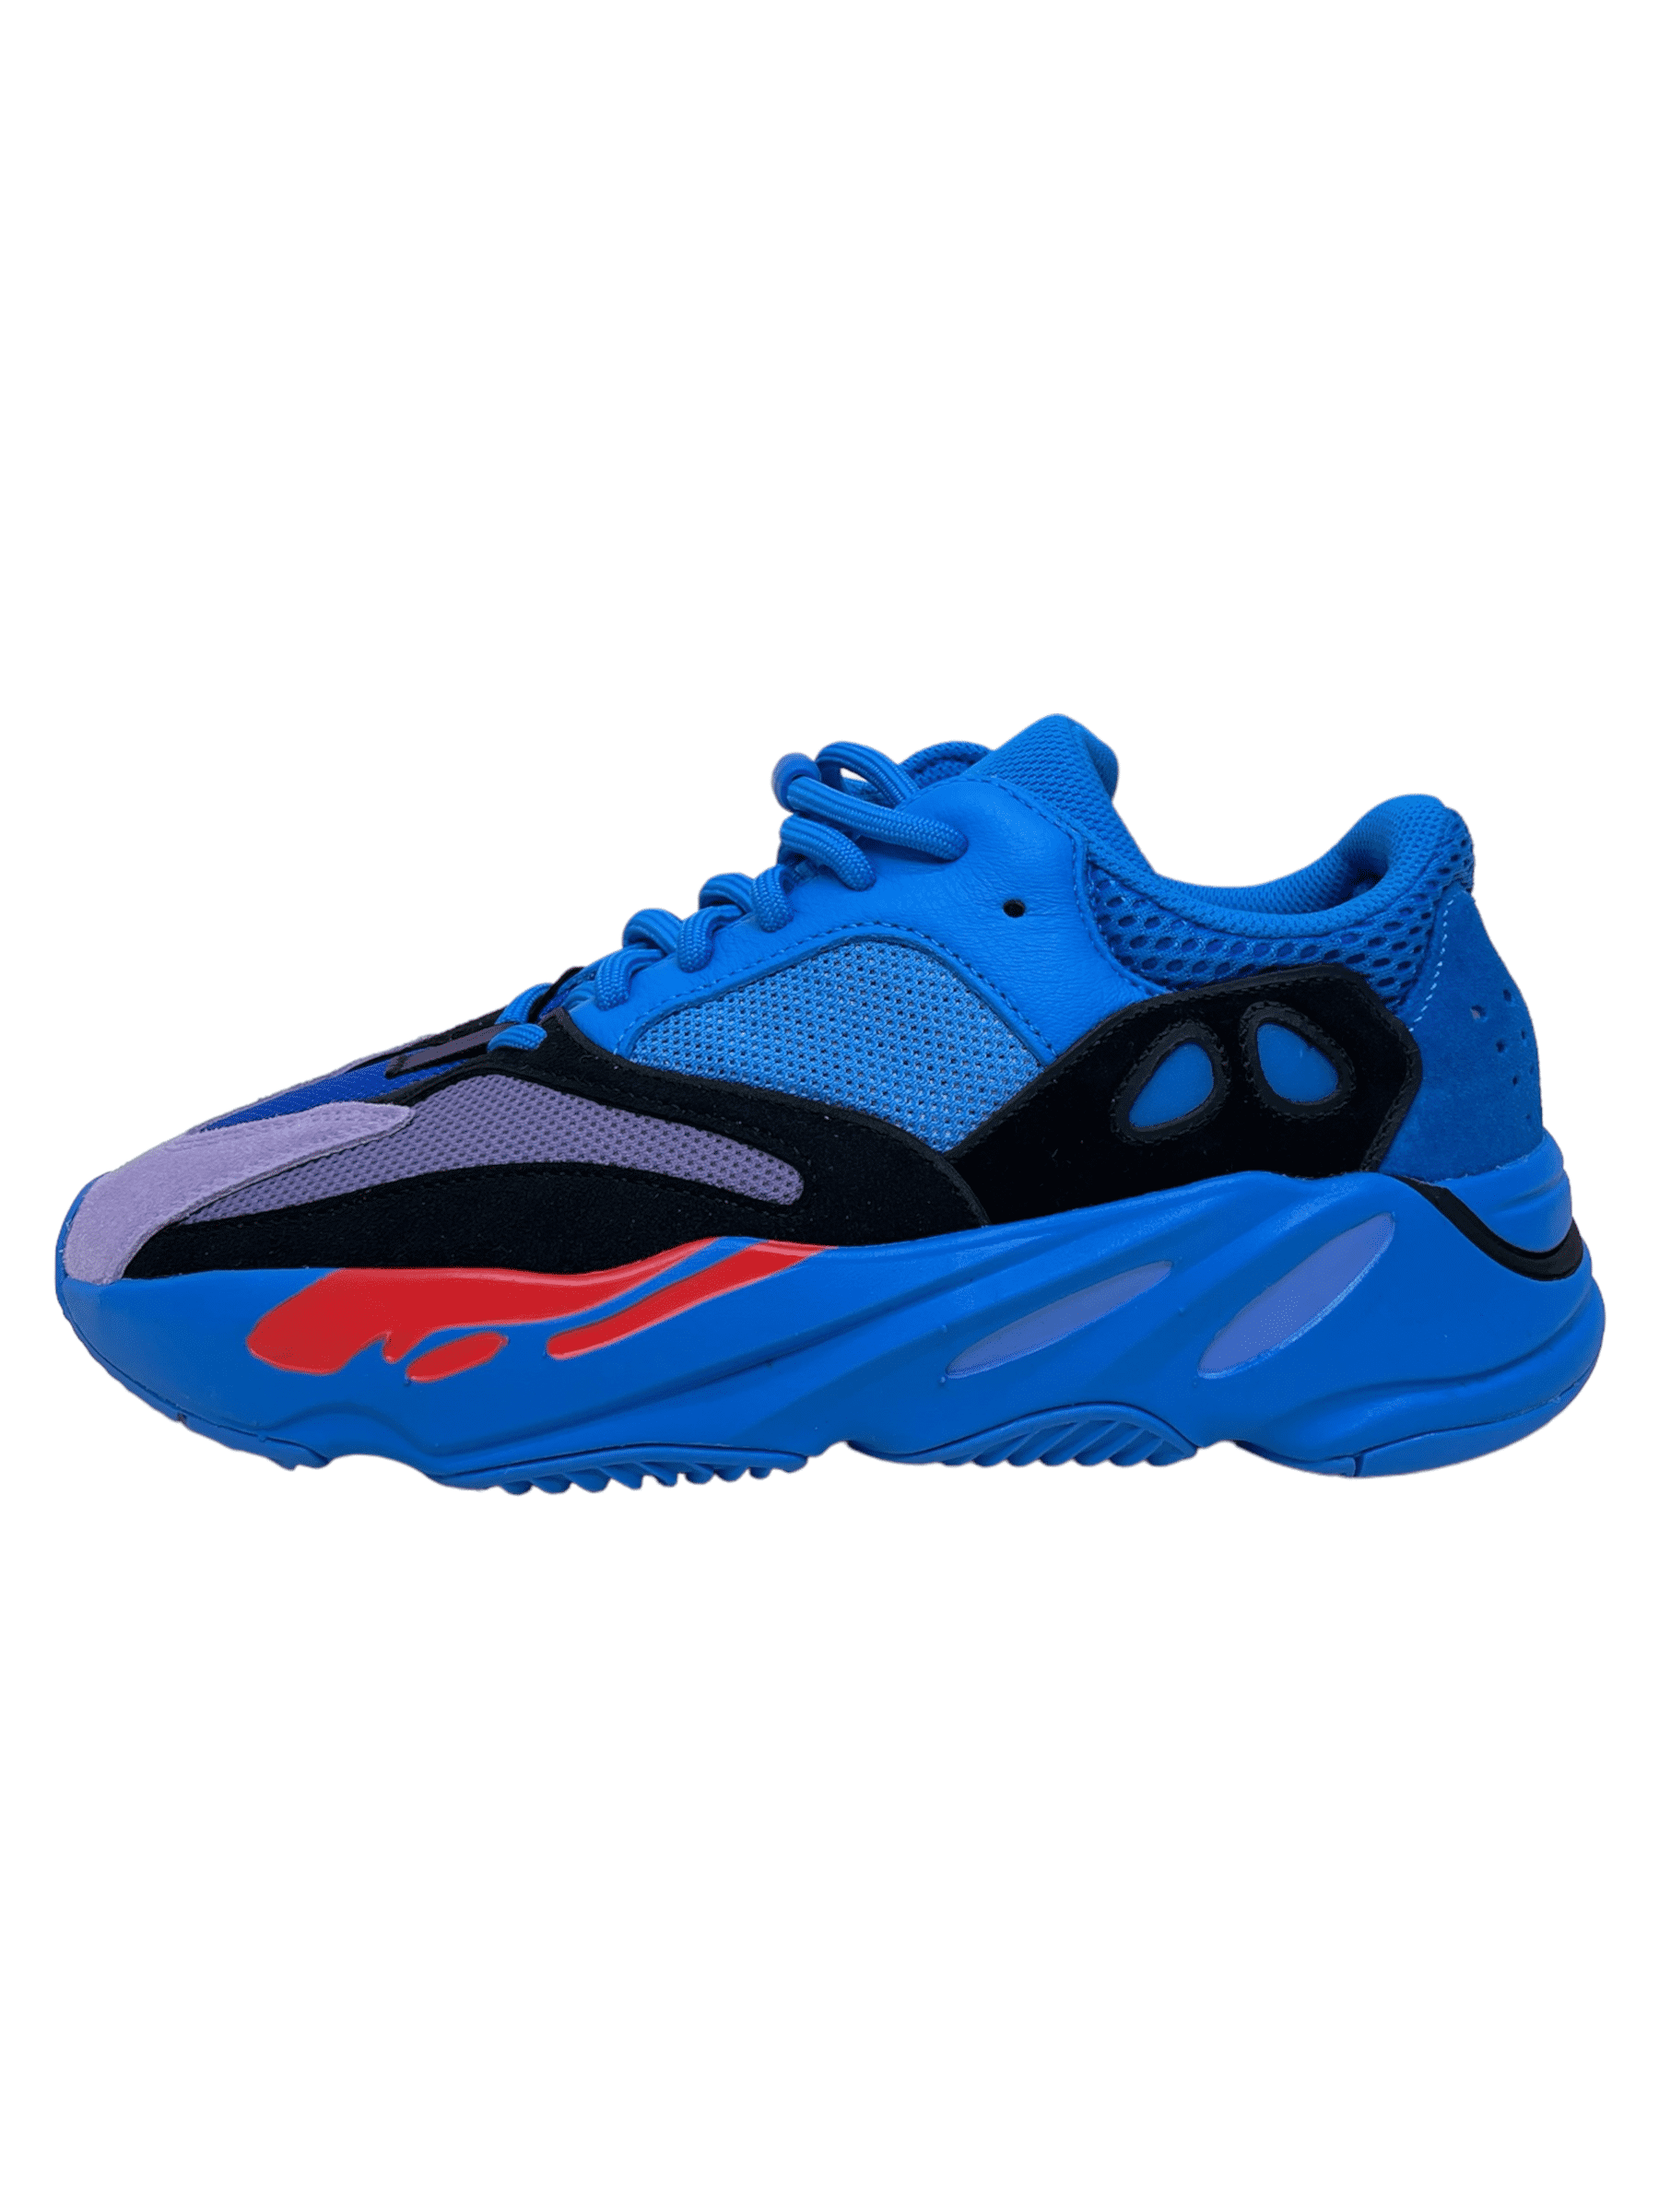 Adidas Yeezy 700 Hi-Res Blue Sneakers - Genuine Design Luxury Consignment for Men. New & Pre-Owned Clothing, Shoes, & Accessories. Calgary, Canada